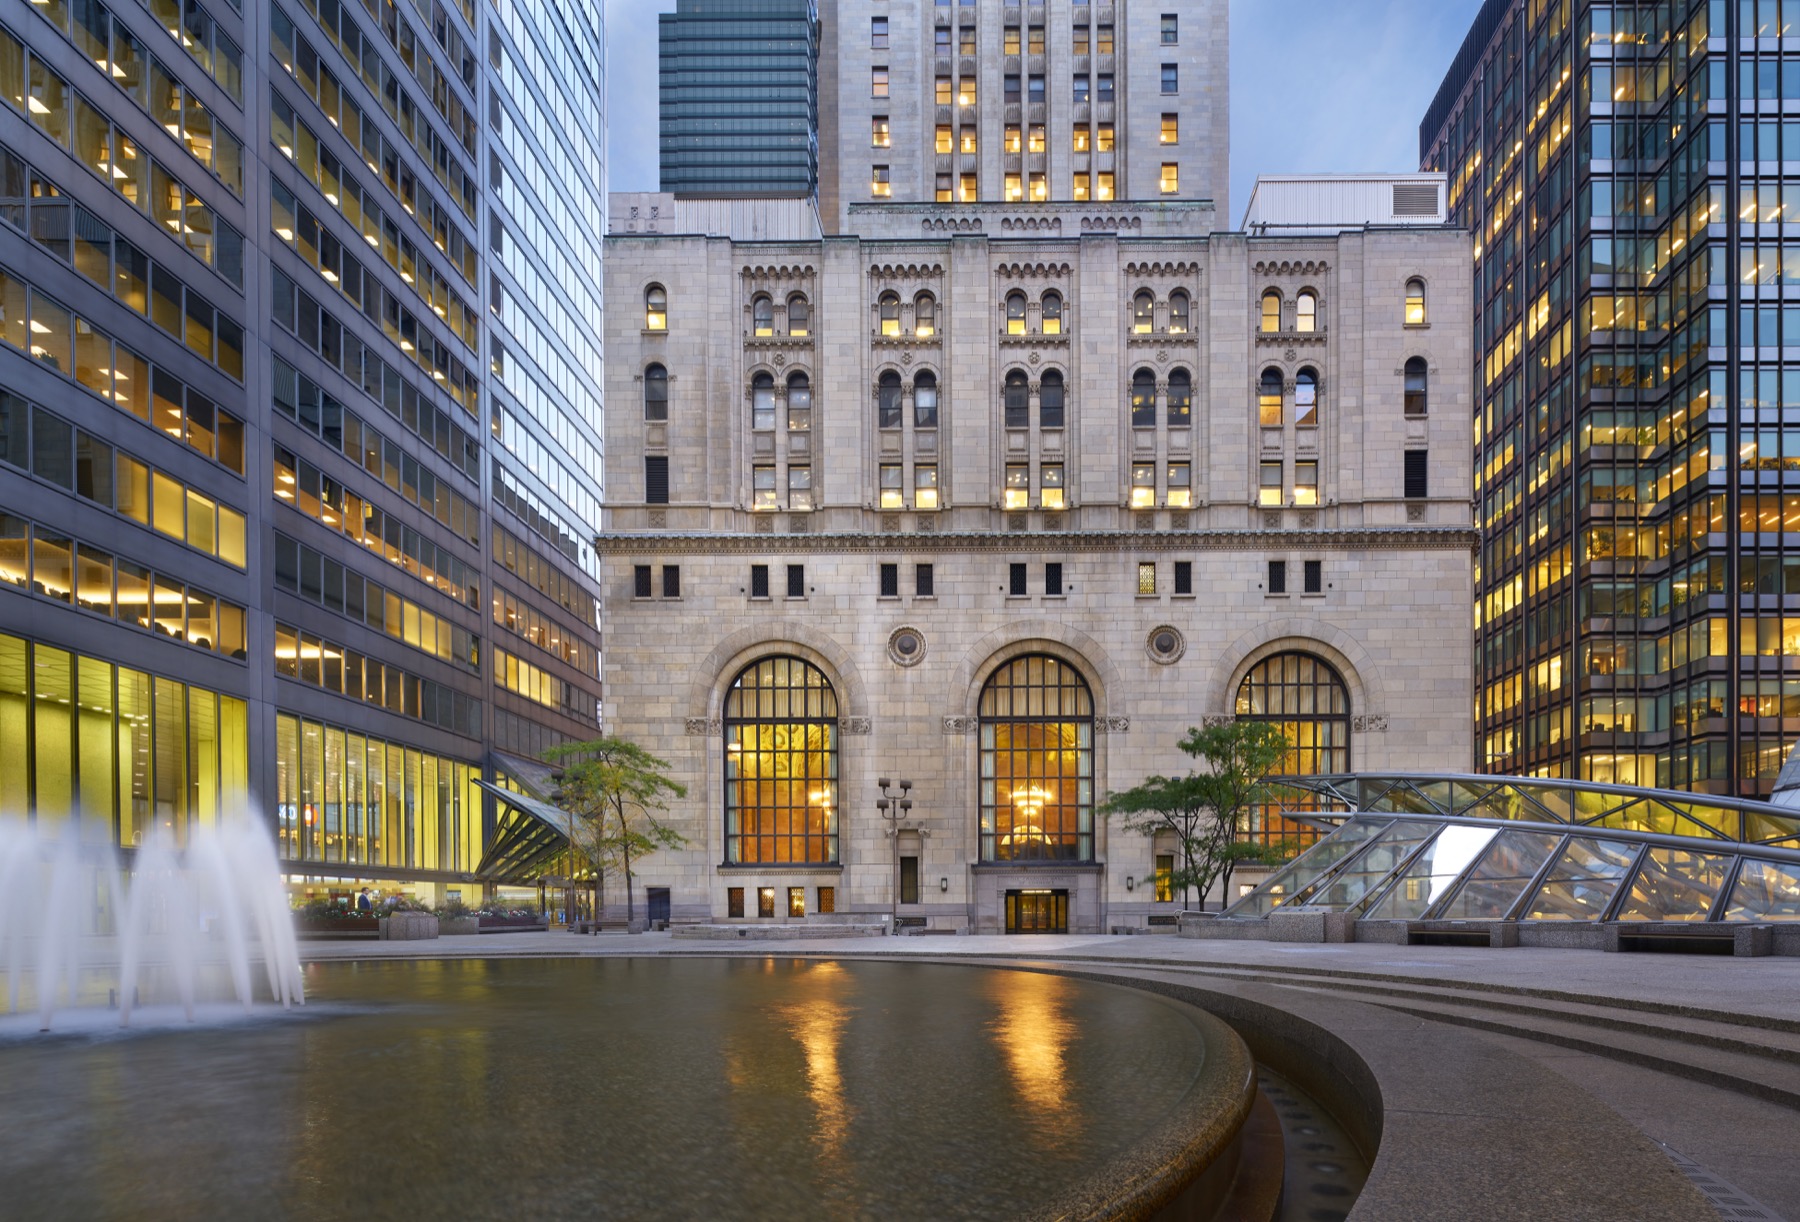 About Commerce Court